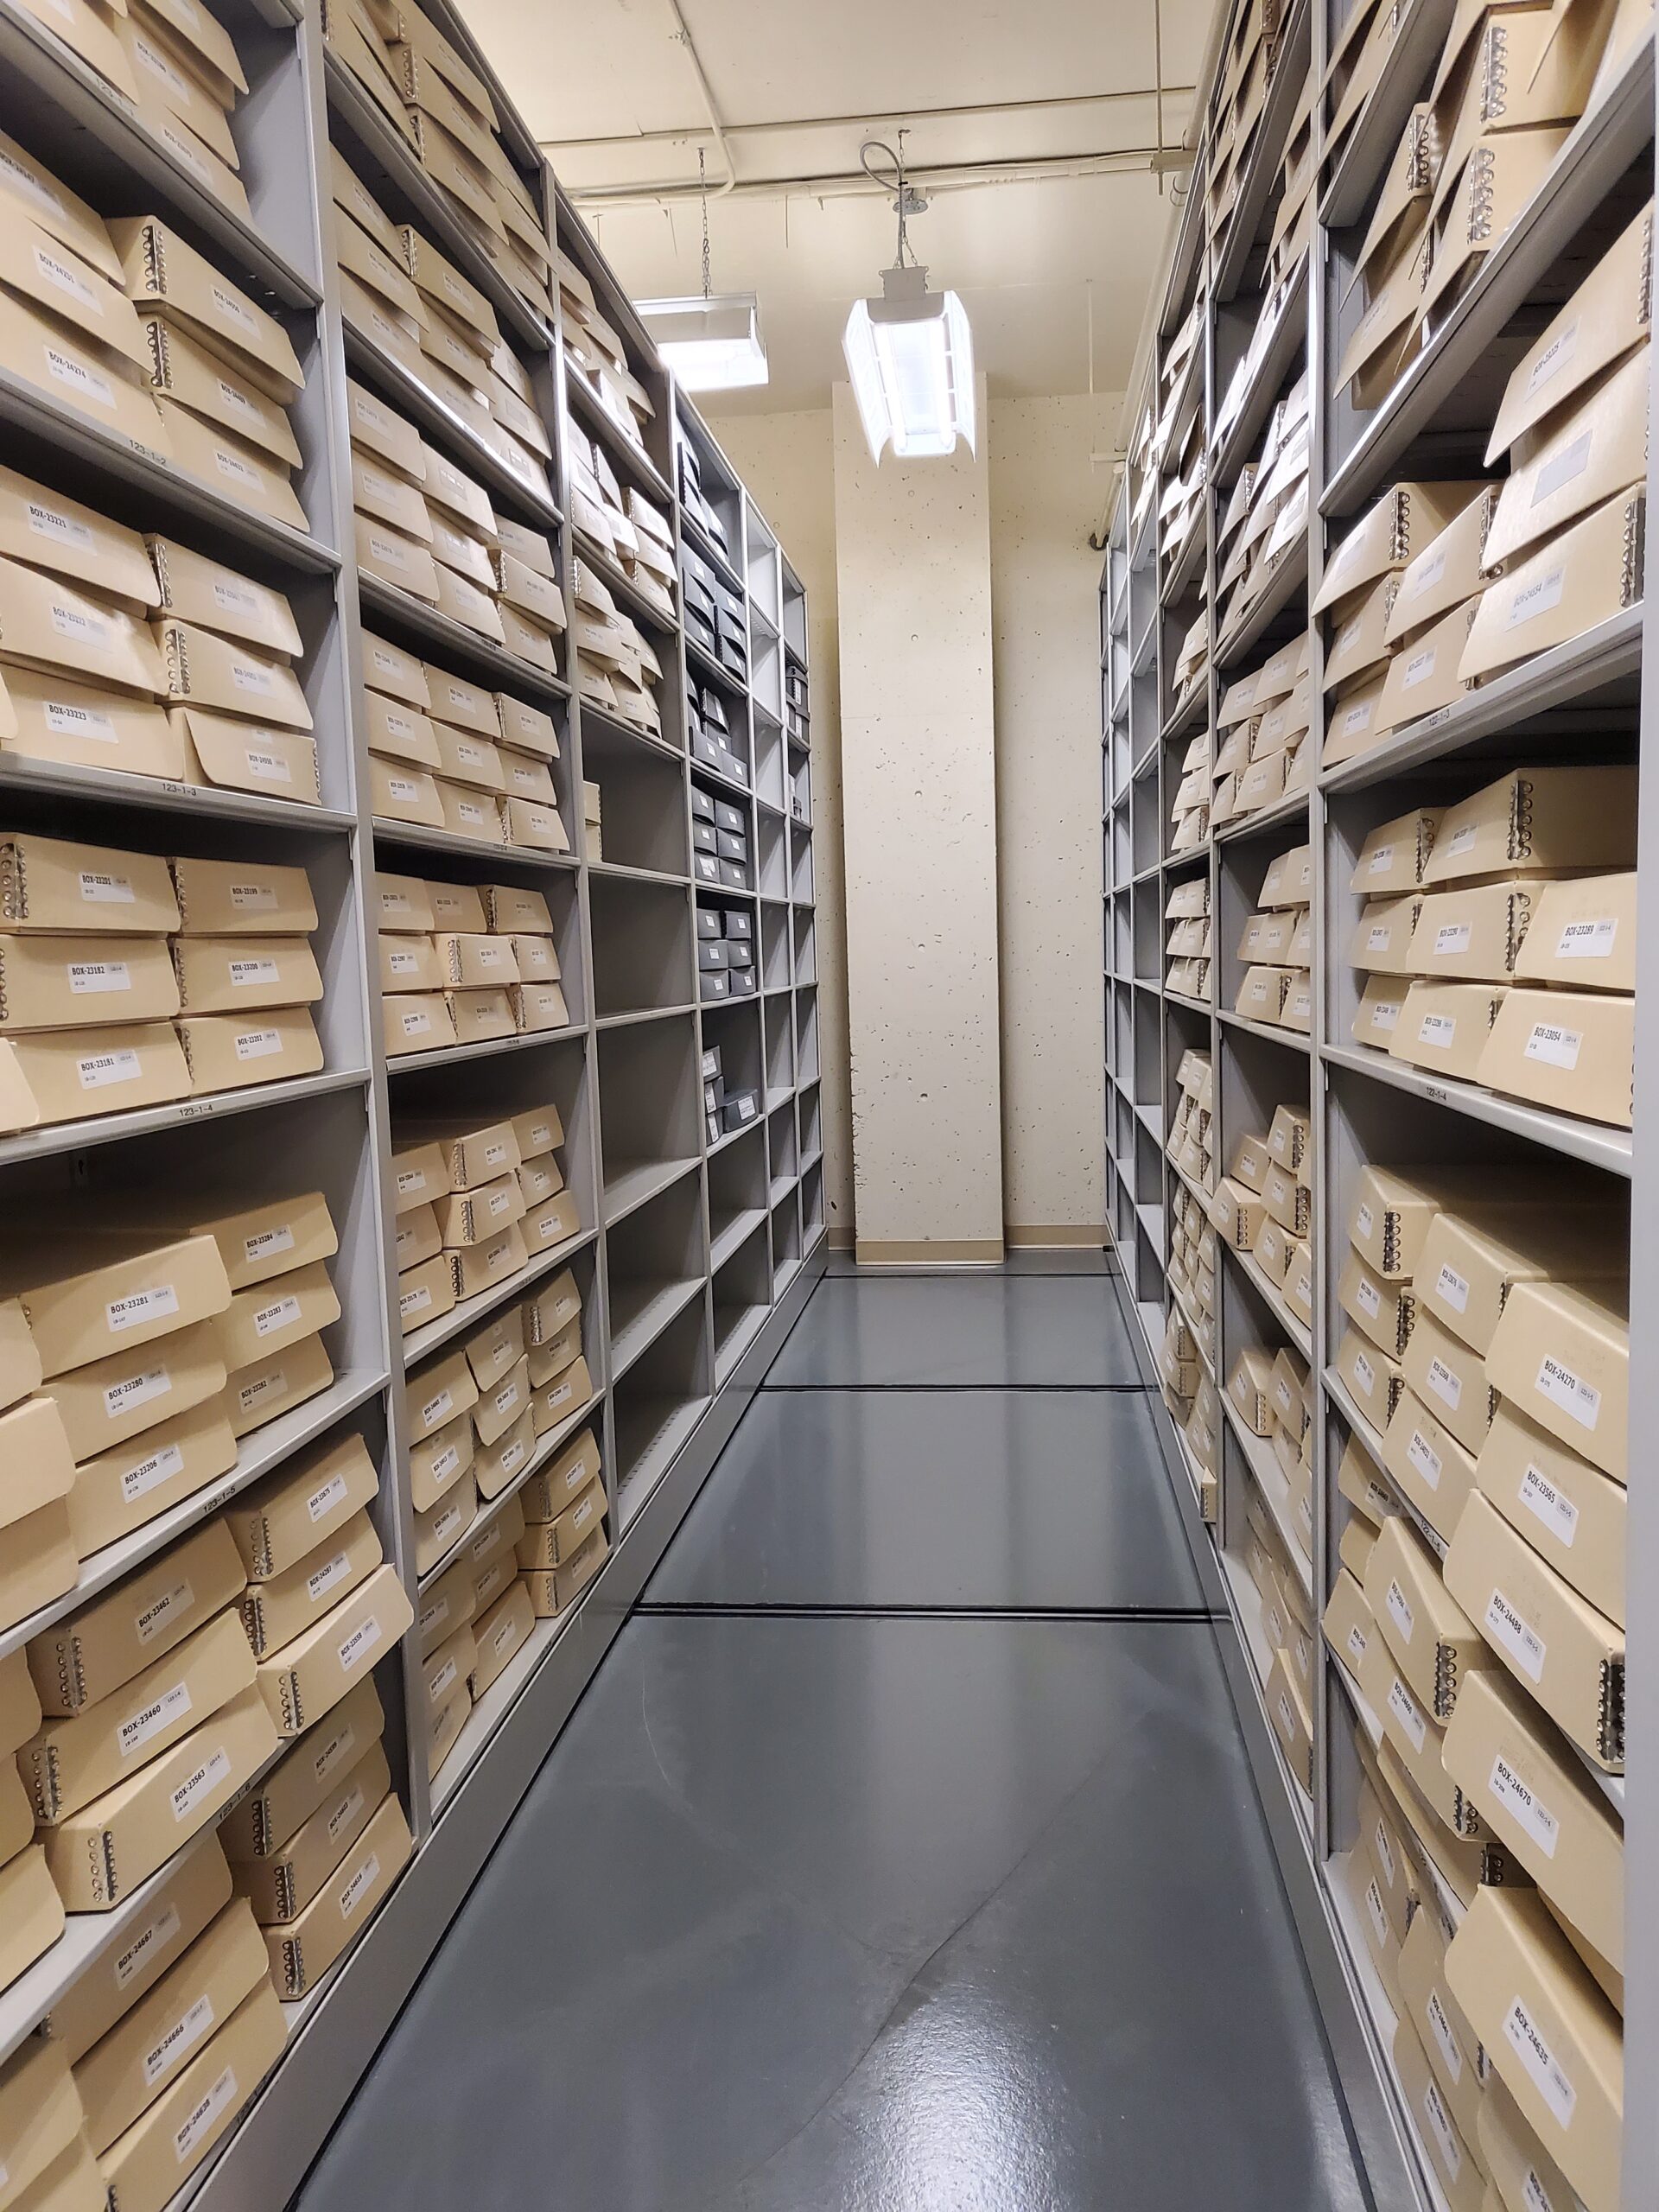 A hallway with shelves on either side holding beige archive materials. The floor is grey and is illuminated by fluorescent light. Overall, pretty bland.